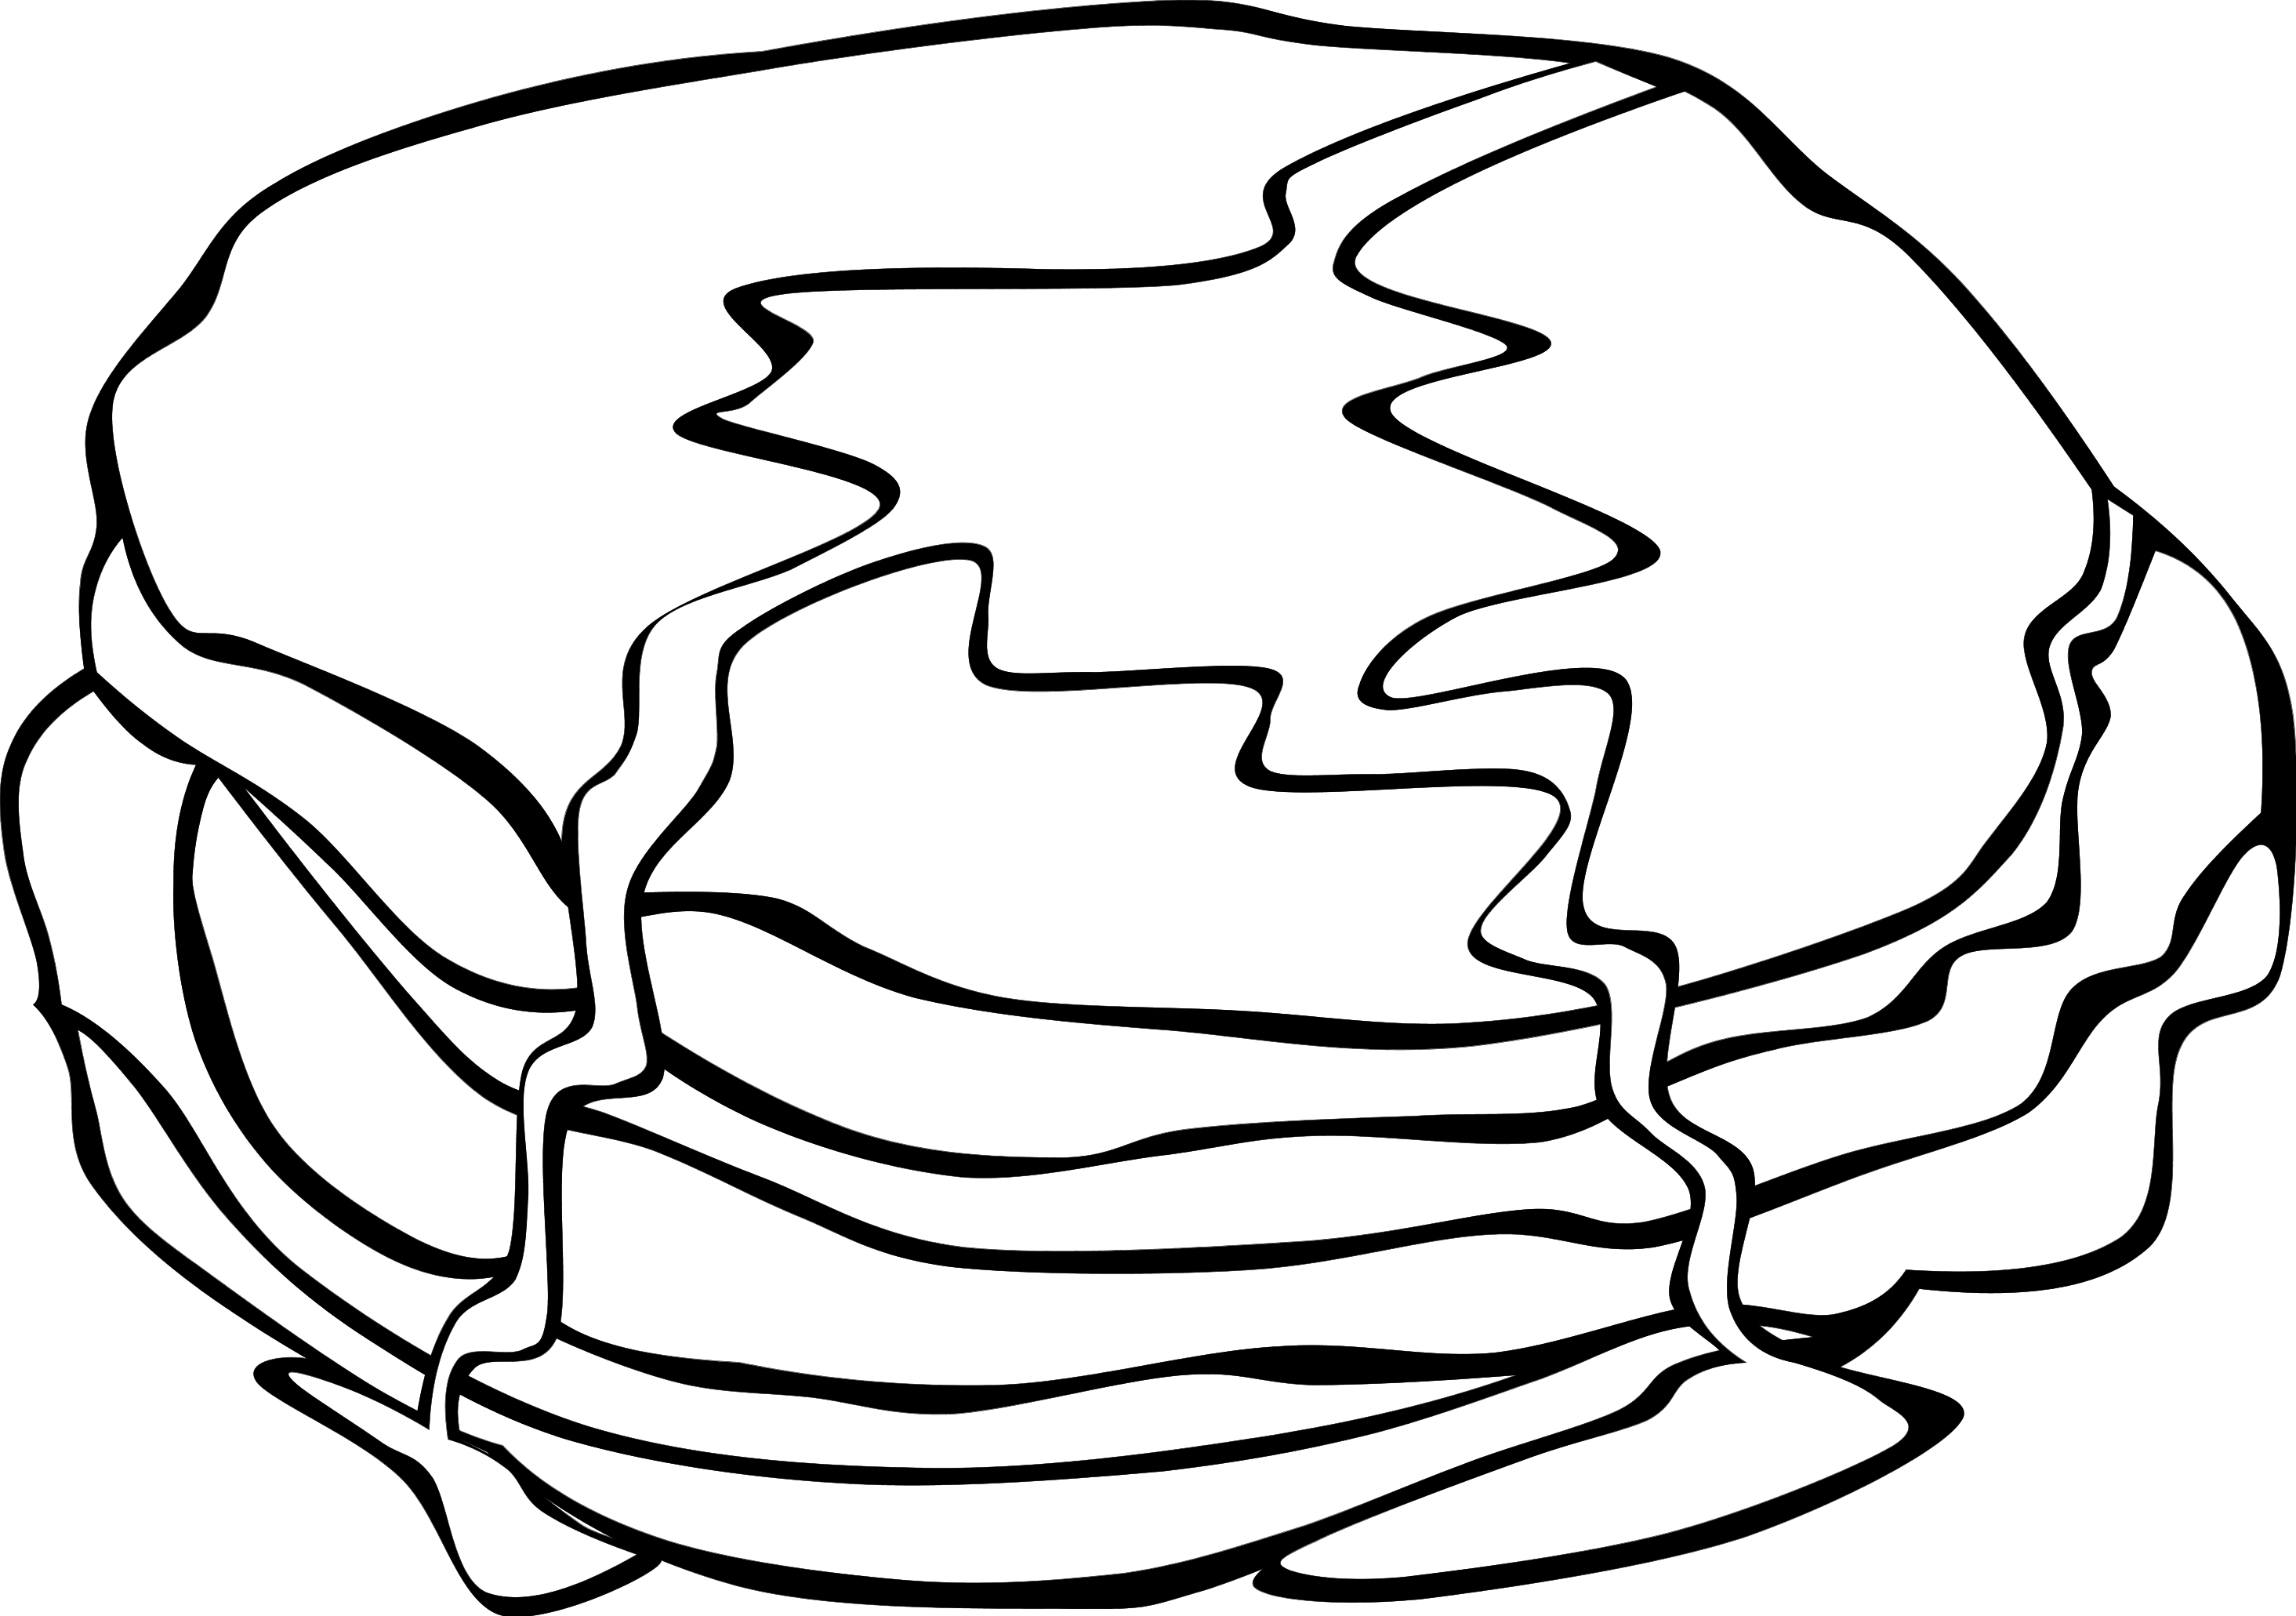 Pancakes outline